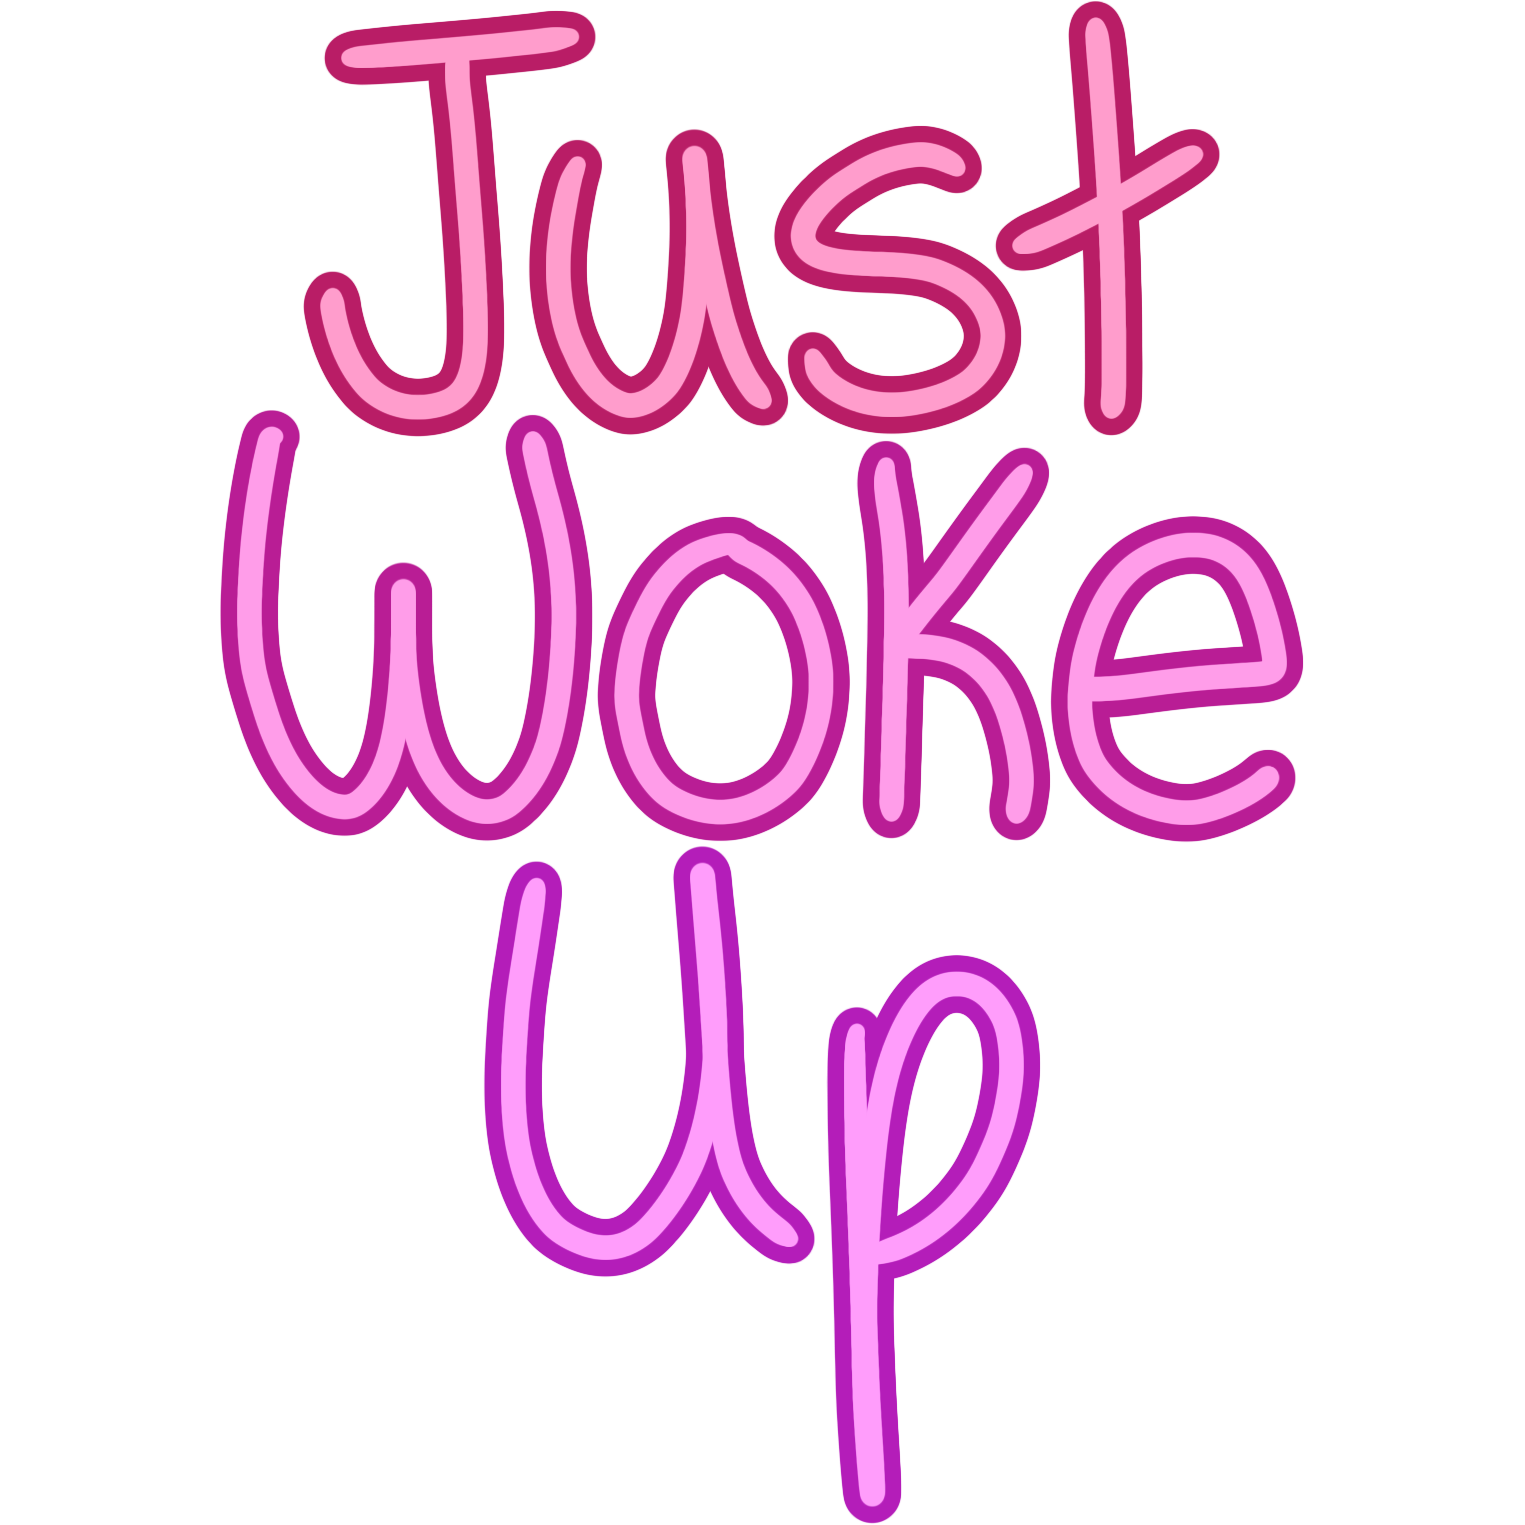 bubble writing in a gradient of different shades of pink that says 'Just Woke Up'.